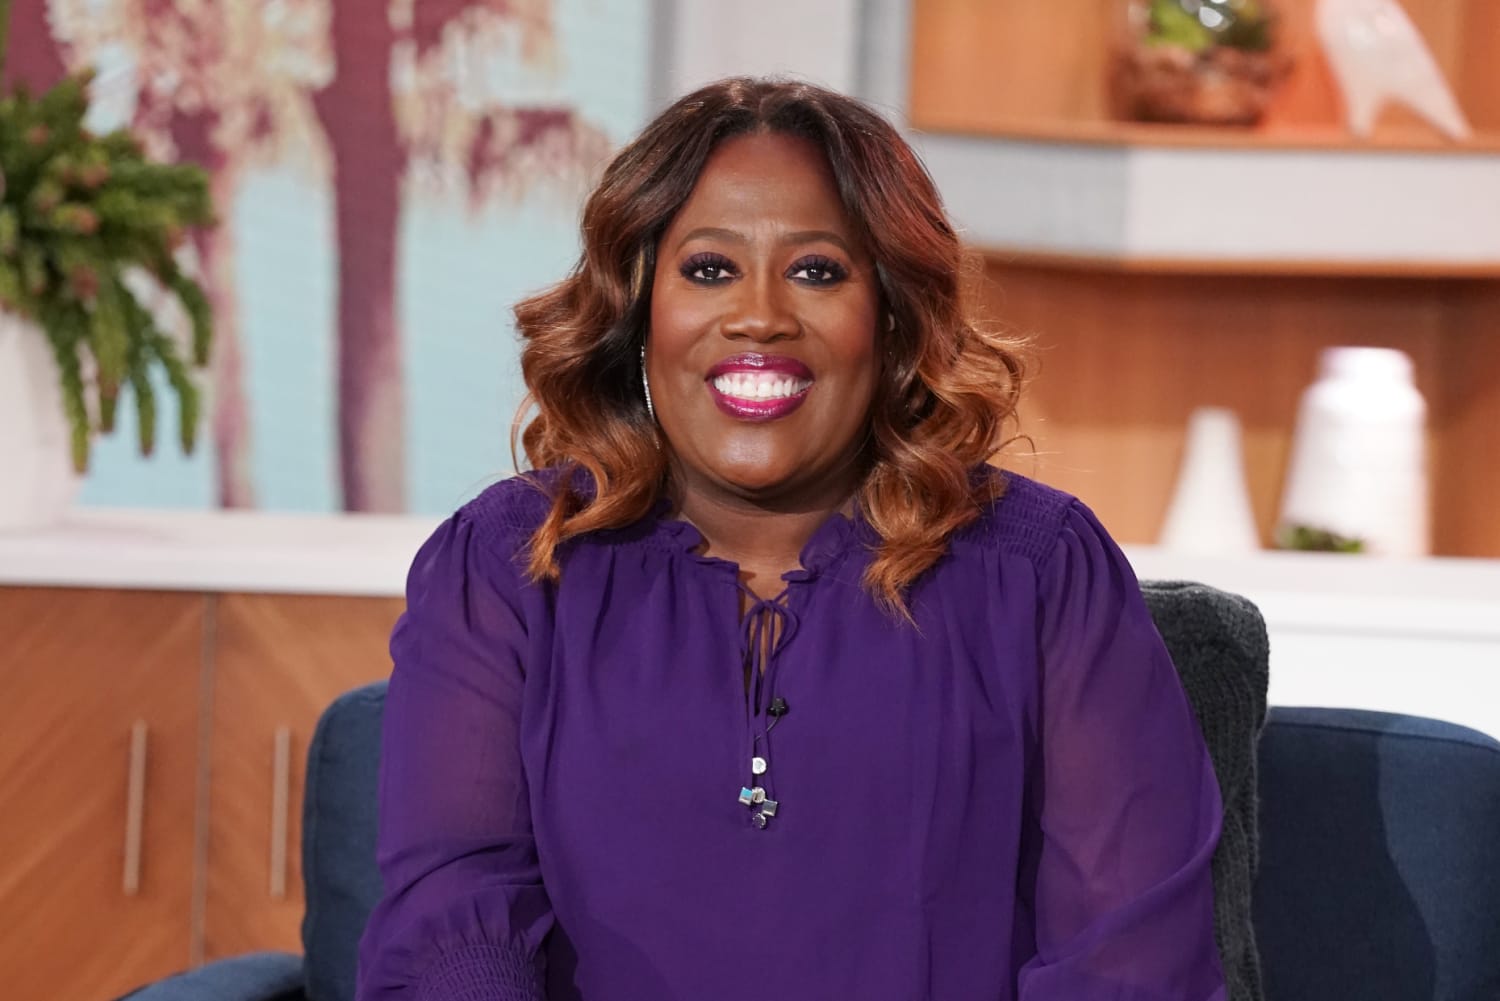 The 58-year old daughter of father (?) and mother(?) Sheryl Underwood in 2022 photo. Sheryl Underwood earned a  million dollar salary - leaving the net worth at  million in 2022